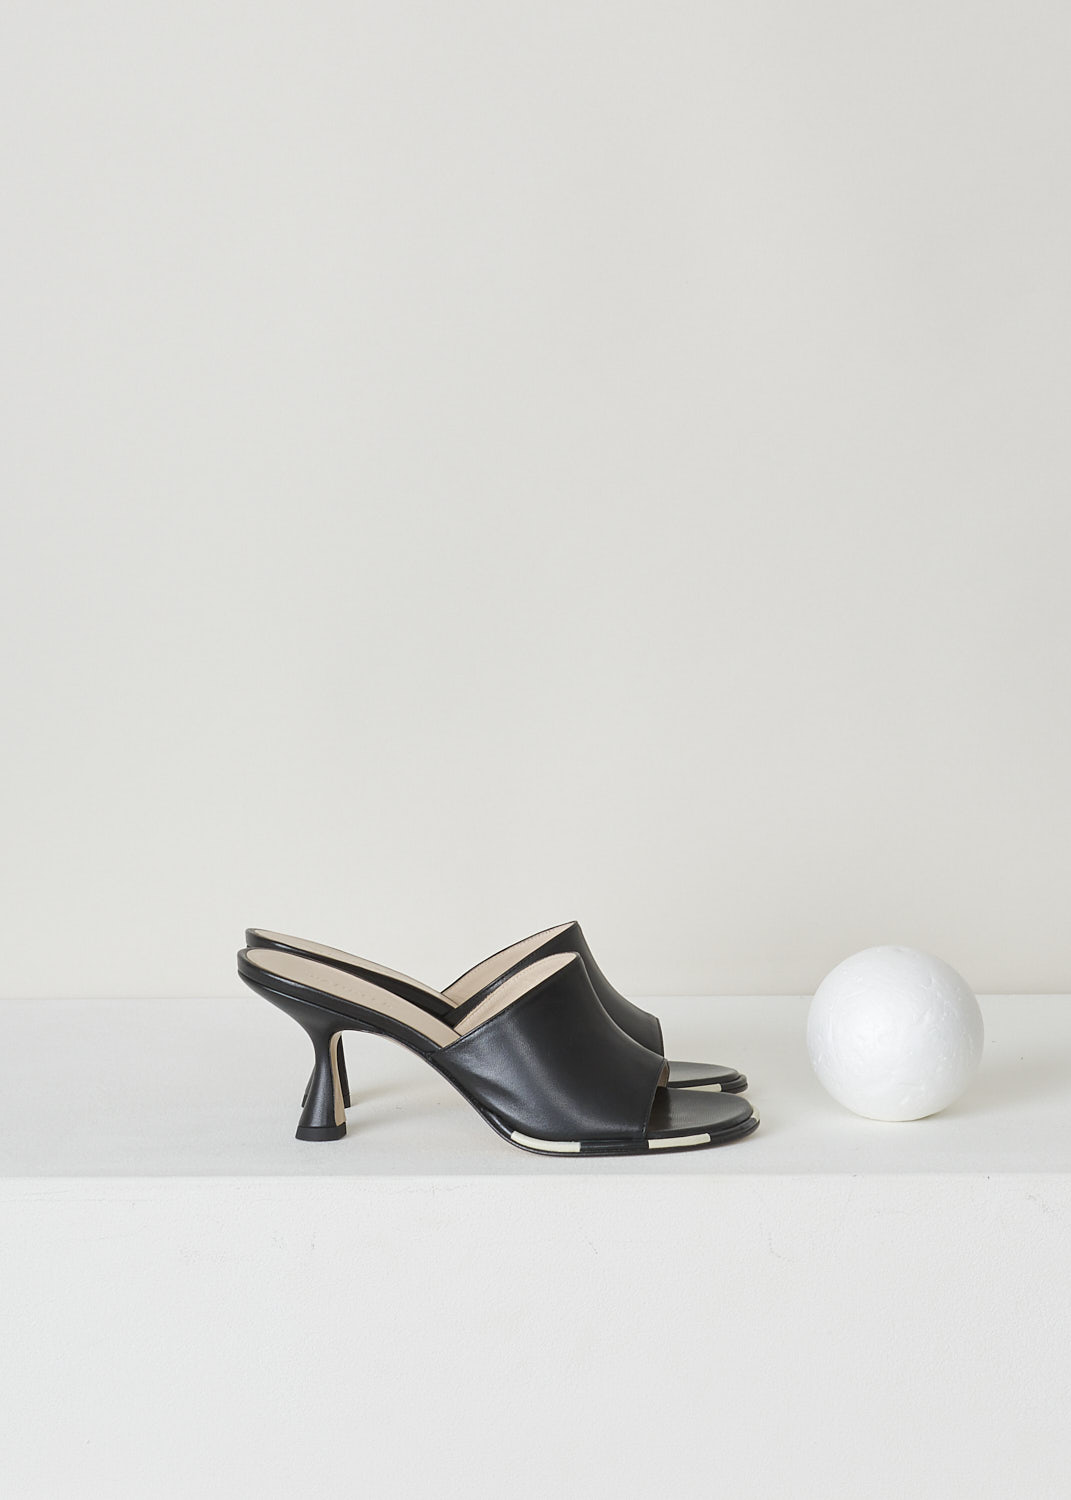 WANDLER, BLACK HEELED MULES, 22202_701204_3248_AGNES_MULE_BLACK_MIX, Black, Side, These black heeled mules have a rounded open-toe with contrasting white stripes decorating the trim. The slip-on mules have a mid-height trapezoid shaped heel.
